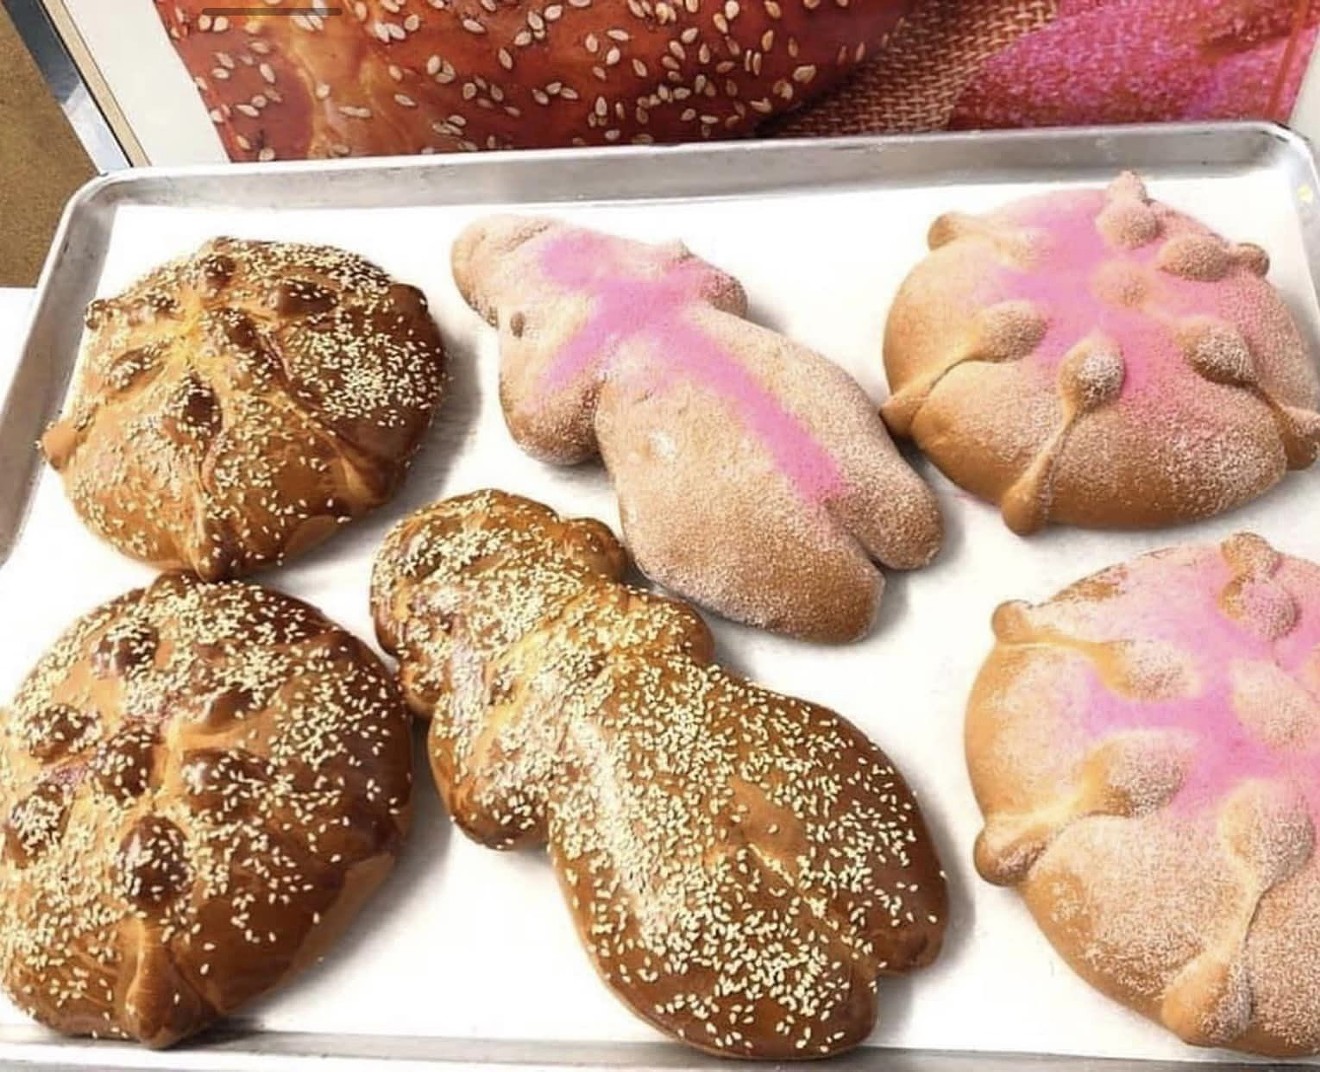 The Panadería Los Jarochos bakers sometimes switch out the sugar and top it with sesame seeds instead.